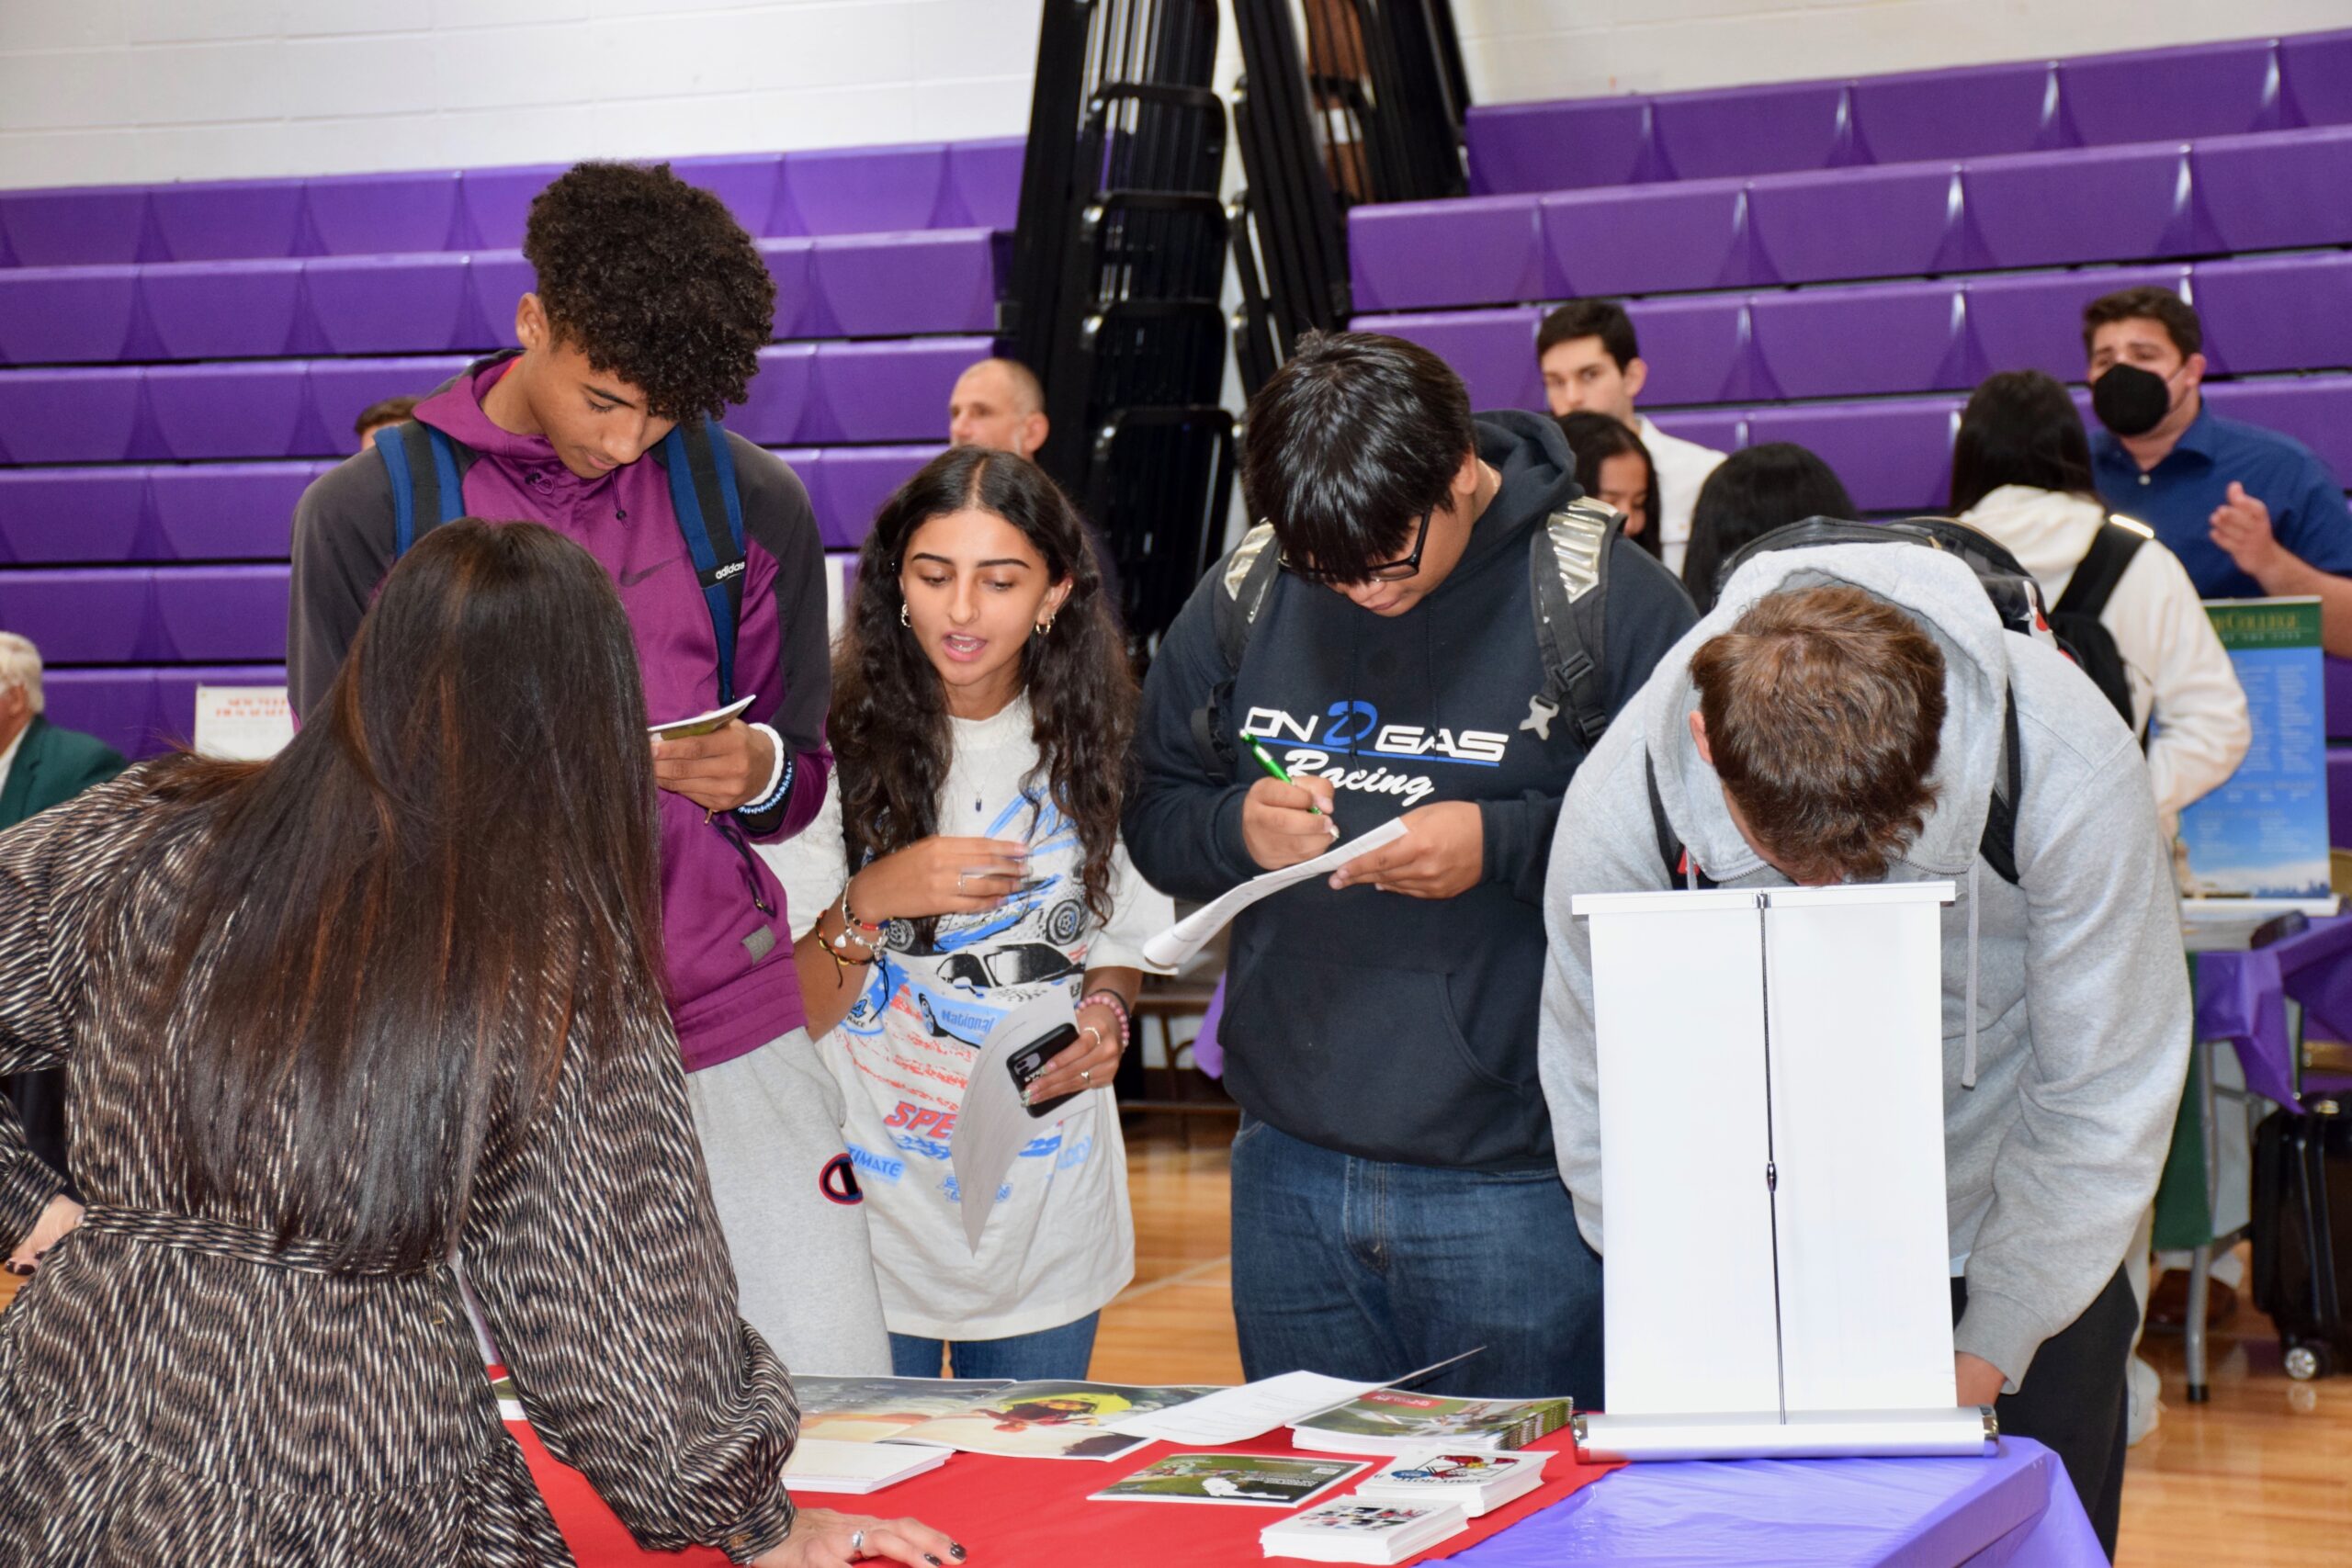 Hampton Bays High School students had an opportunity to explore college options during their school’s annual Fall College Fair, held September 28. During the event, students learned more about 100 state and private colleges from school representatives. COURTESY HAMPTON BAYS SCHOOL DISTRICT